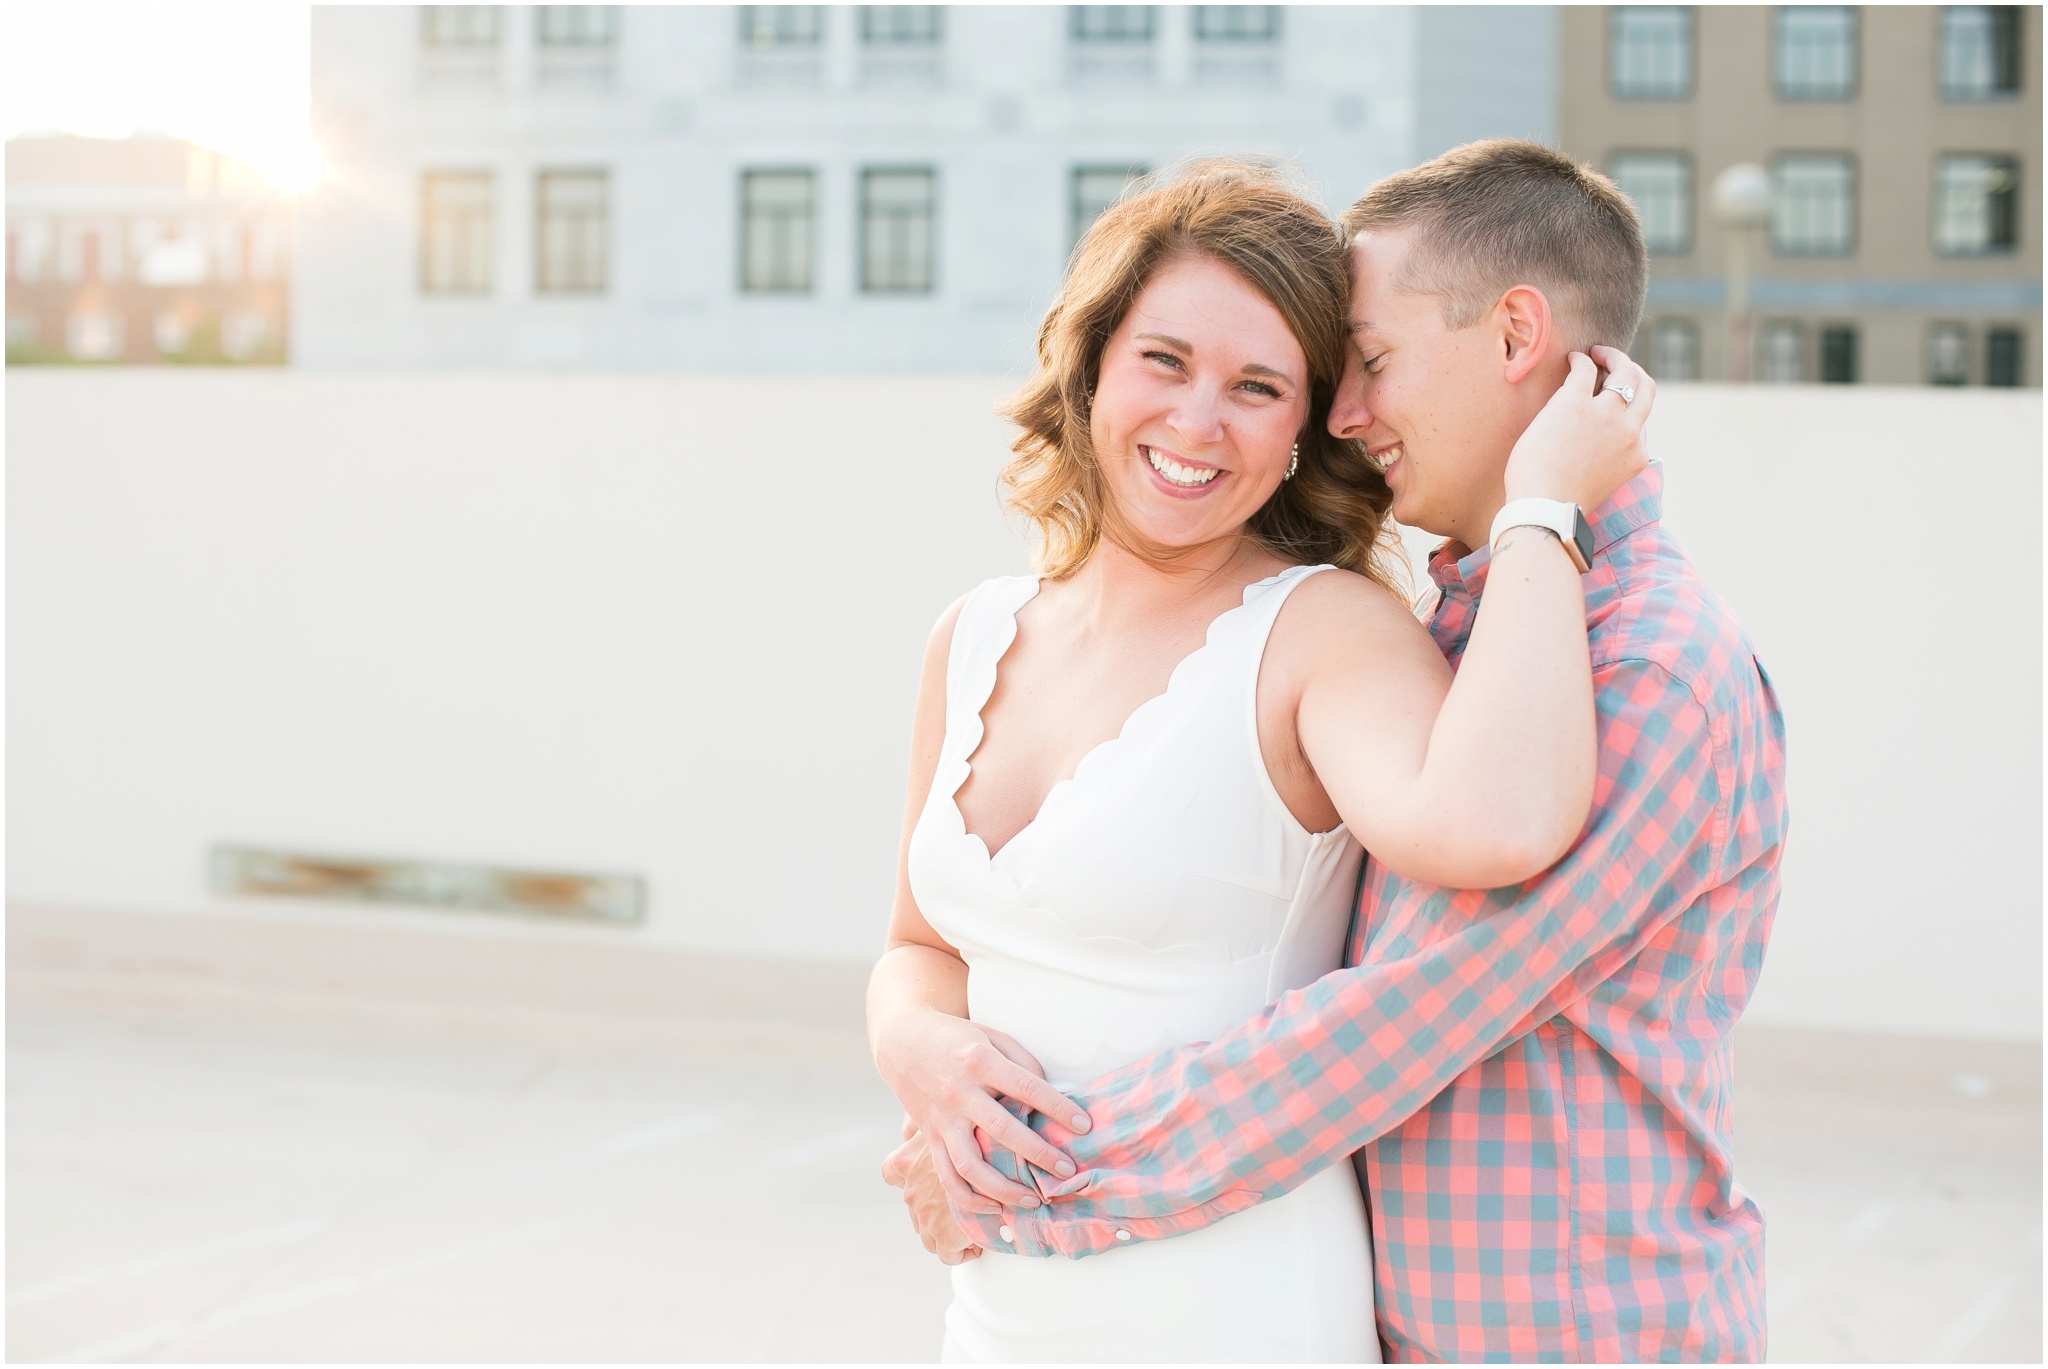 Downtown_Madison_Wisconsin_Engagement_Session_Waterfront_Monona_Terrace_0475.jpg